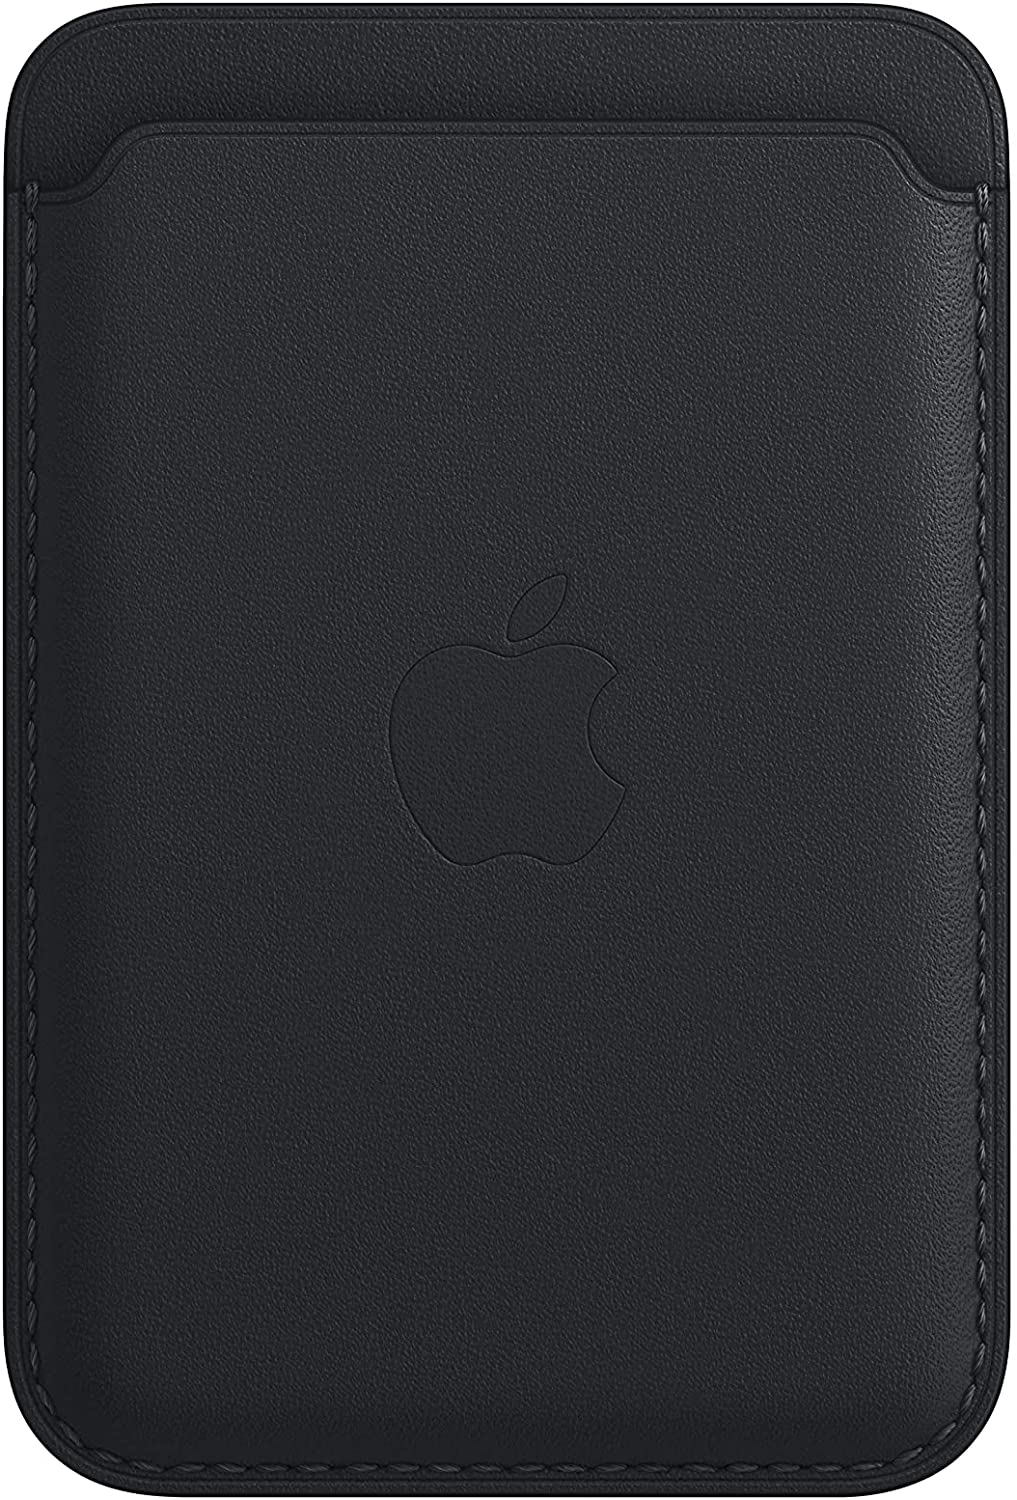 Apple iPhone Leather Wallet w/MagSafe - Midnight (Certified Refurbished)